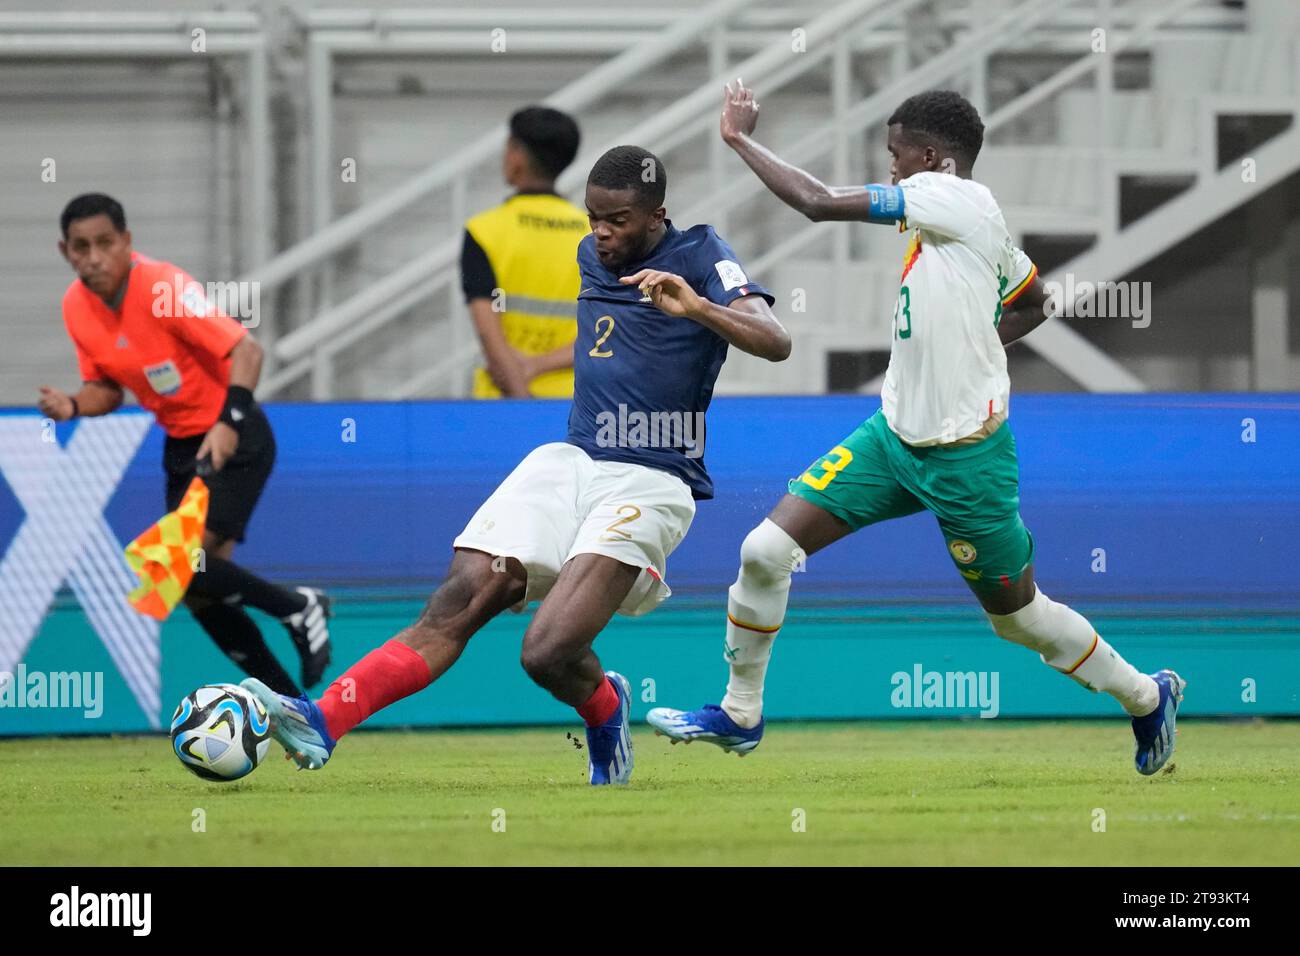 France' Yvann Titi, left, battles for the ball against Senegal's Alpha  Toure during their FIFA U-17 World Cup round of 16 soccer match at Jakarta  International Stadium in Jakarta, Indonesia, Wednesday, Nov.